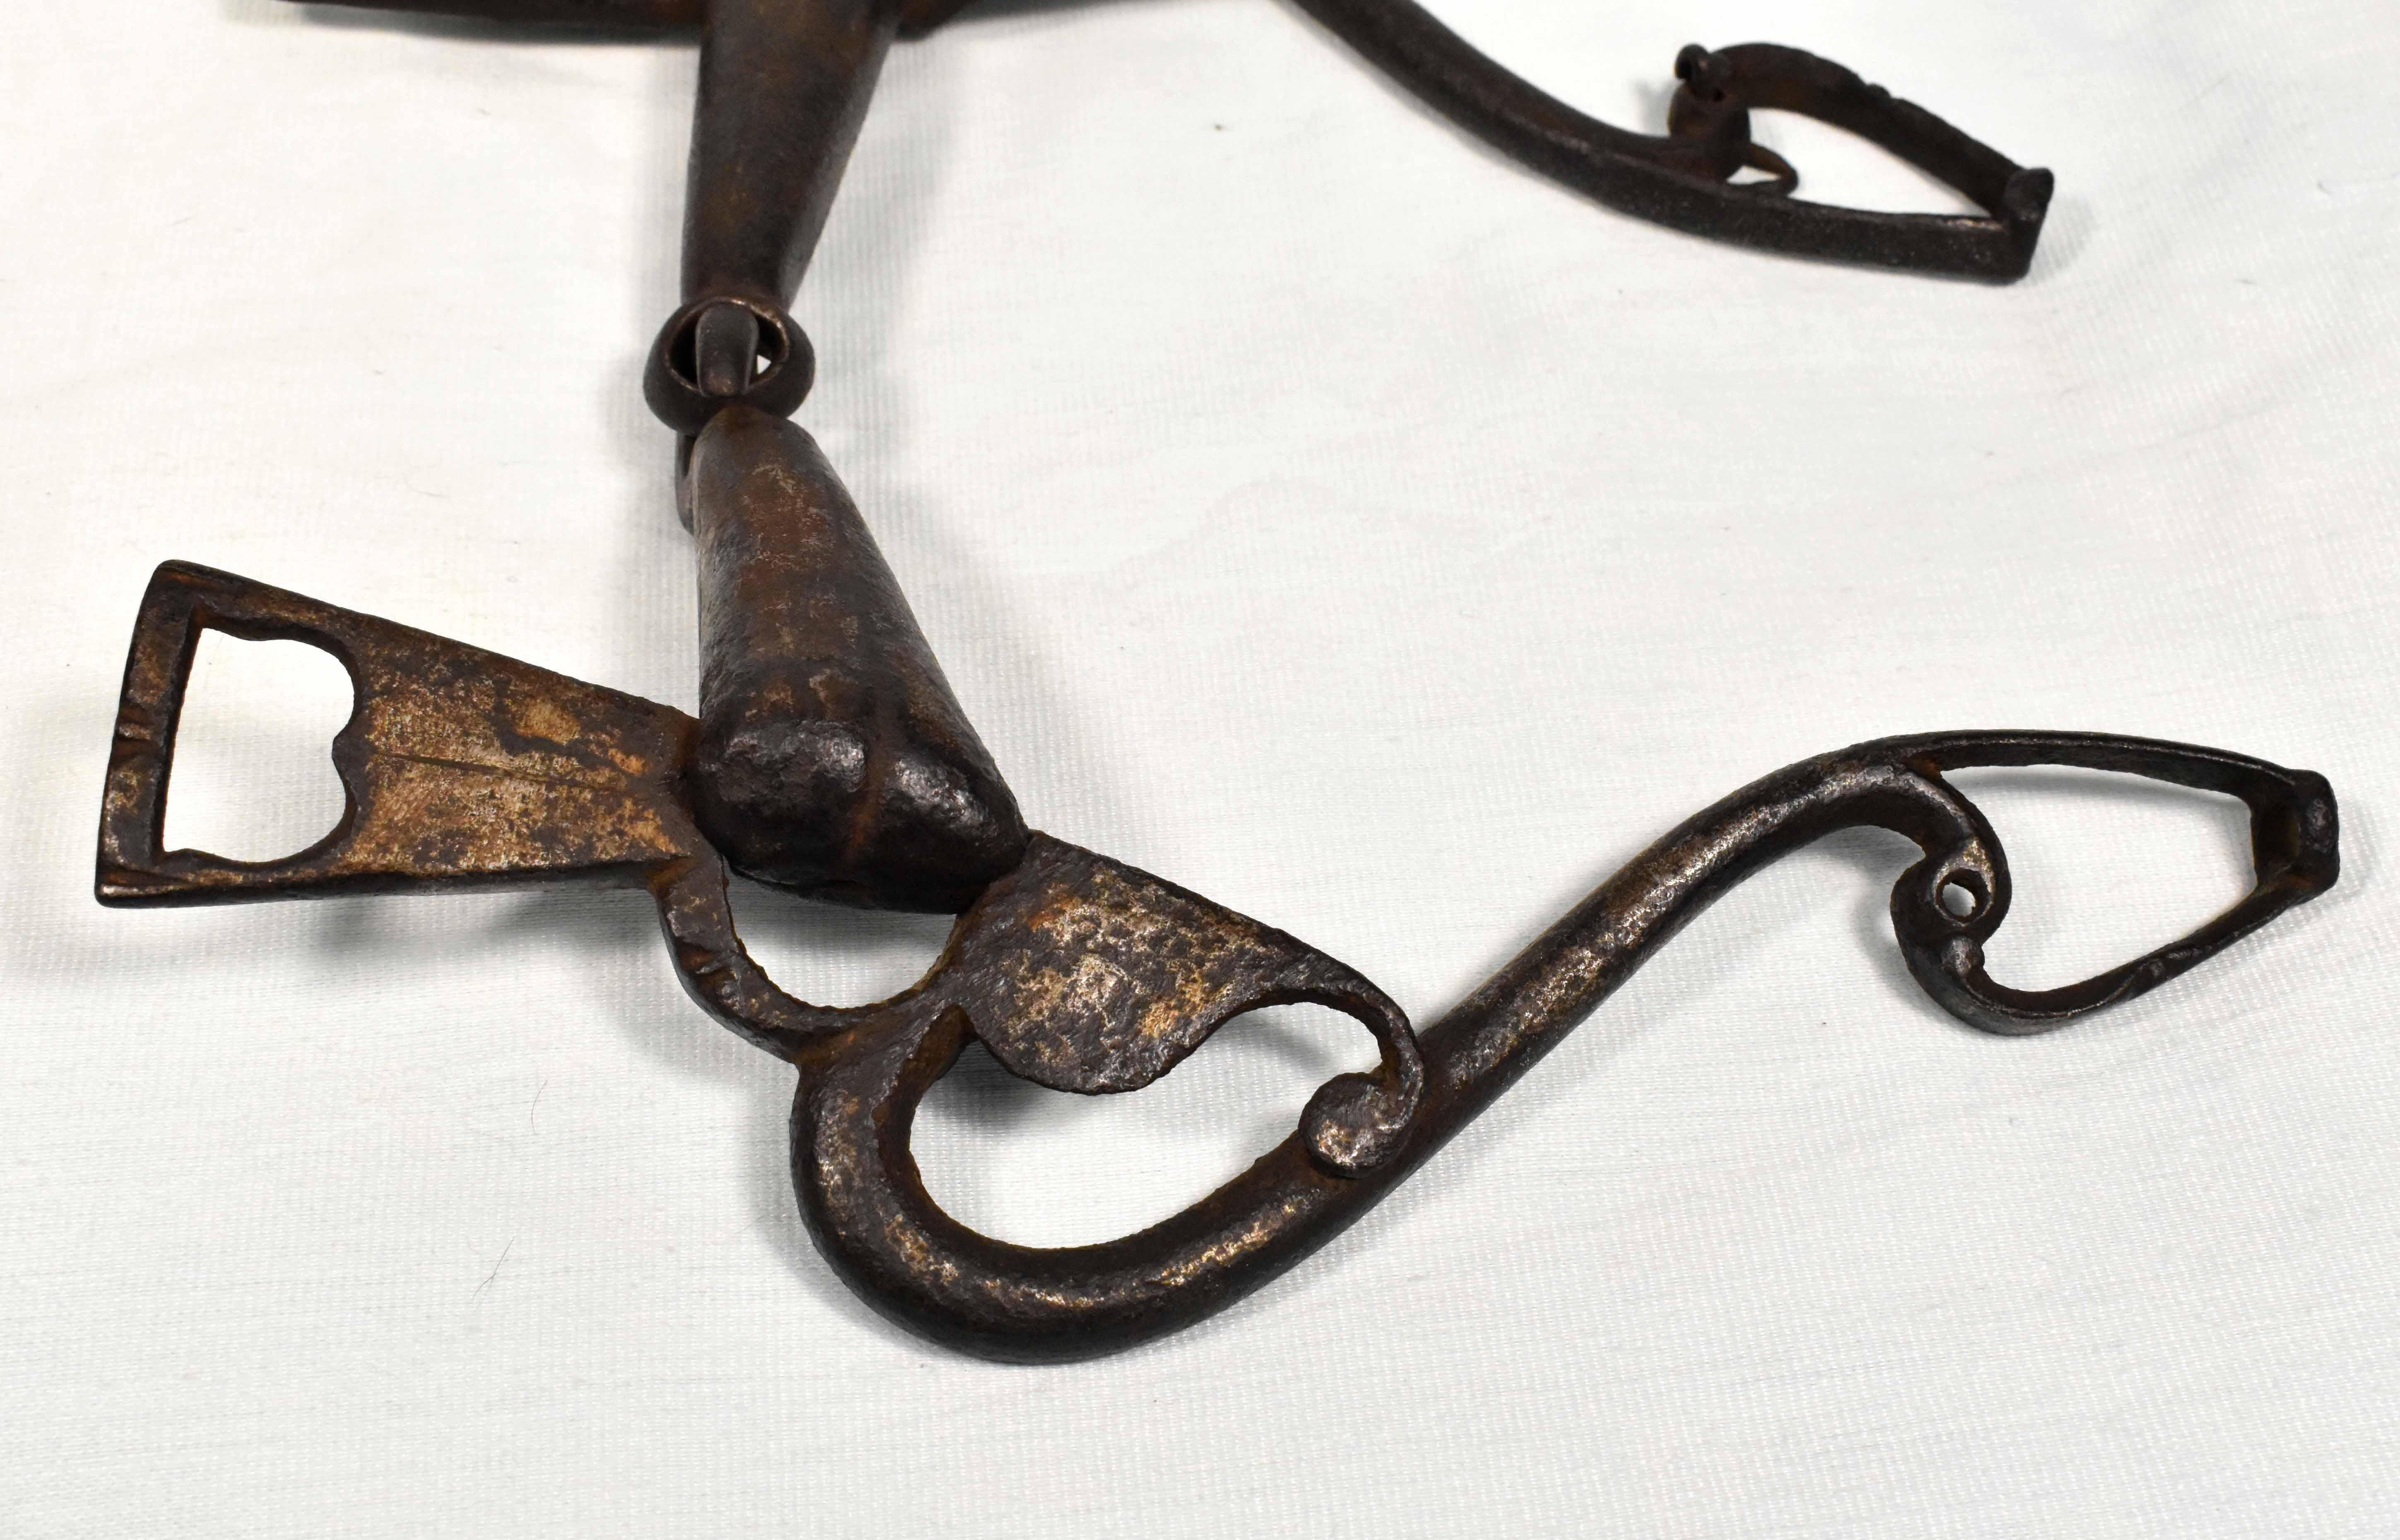 Hand-Crafted Unique Historical Horse Bit from the 16th-17th Century For Sale